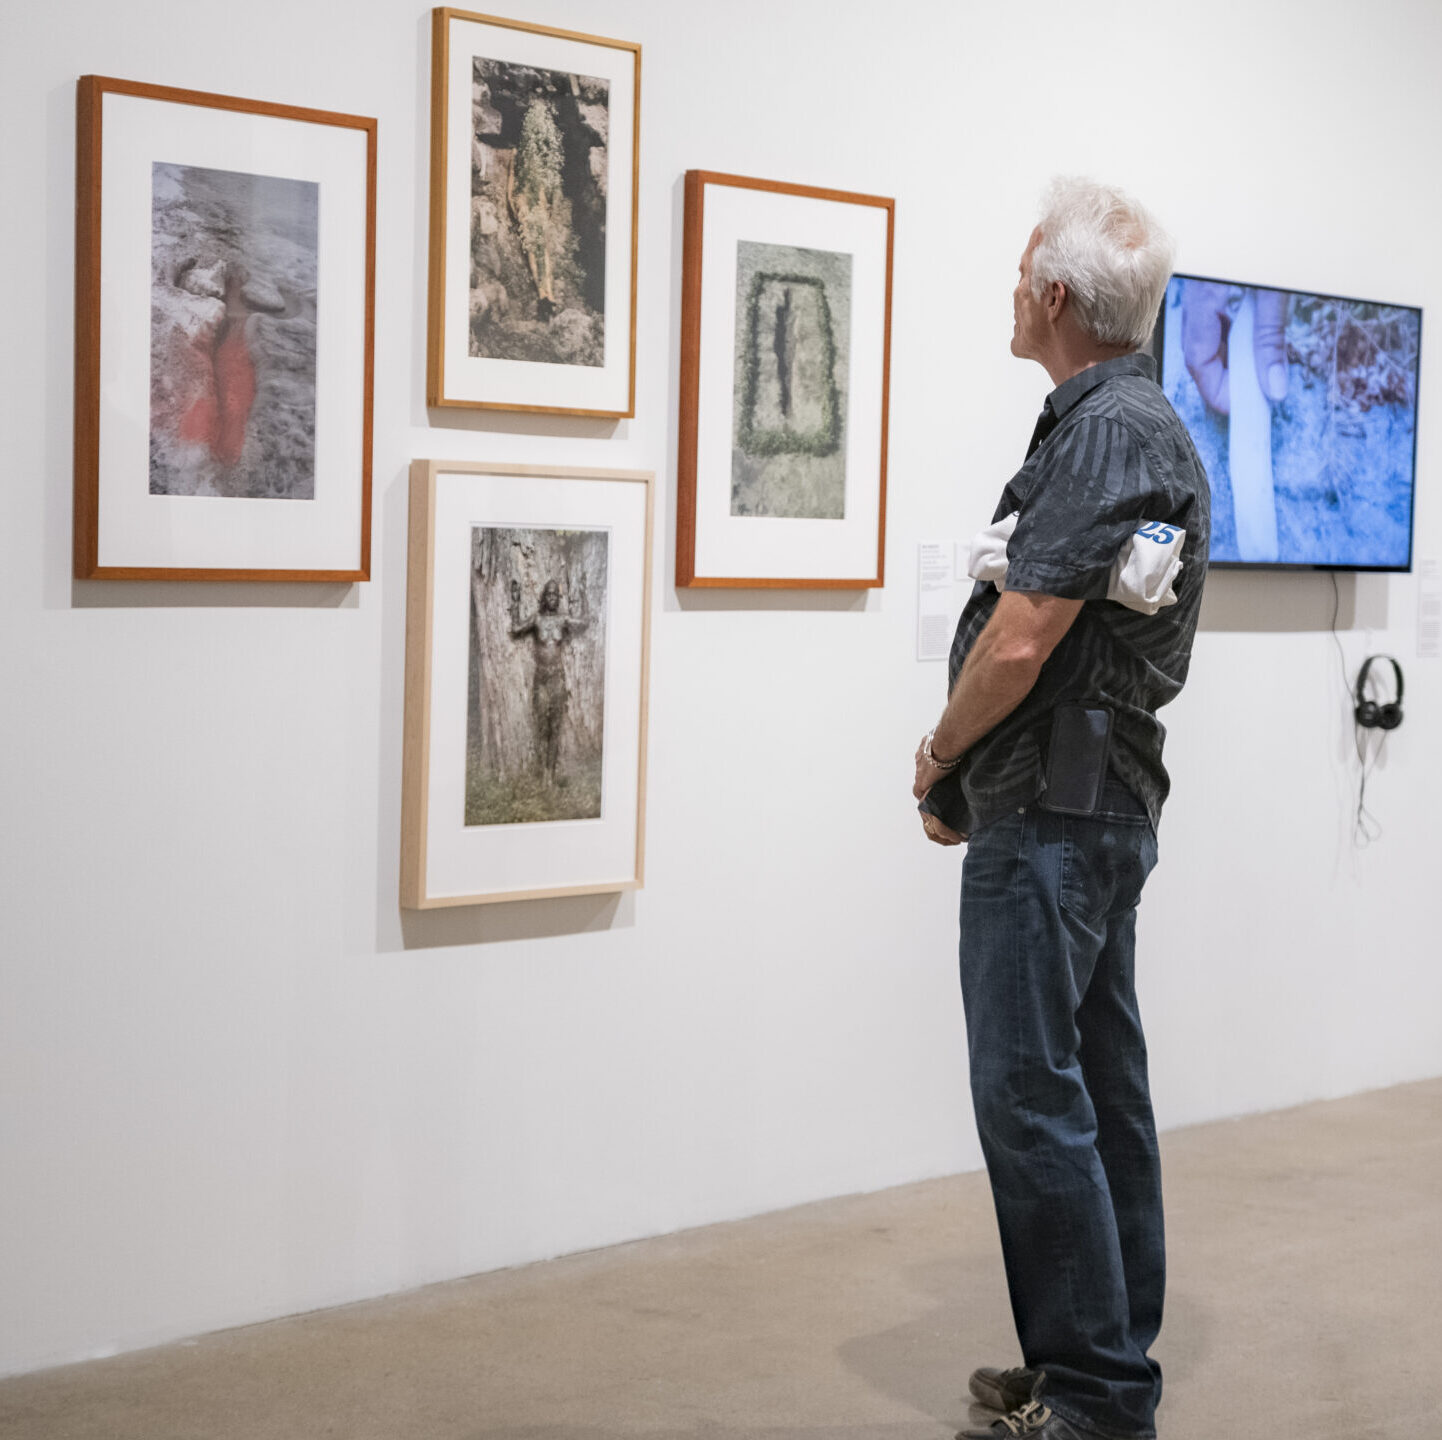 Man looking at wall of four framed photographs. The photographs include scenes of nature, with a female figure or impression of the figure.